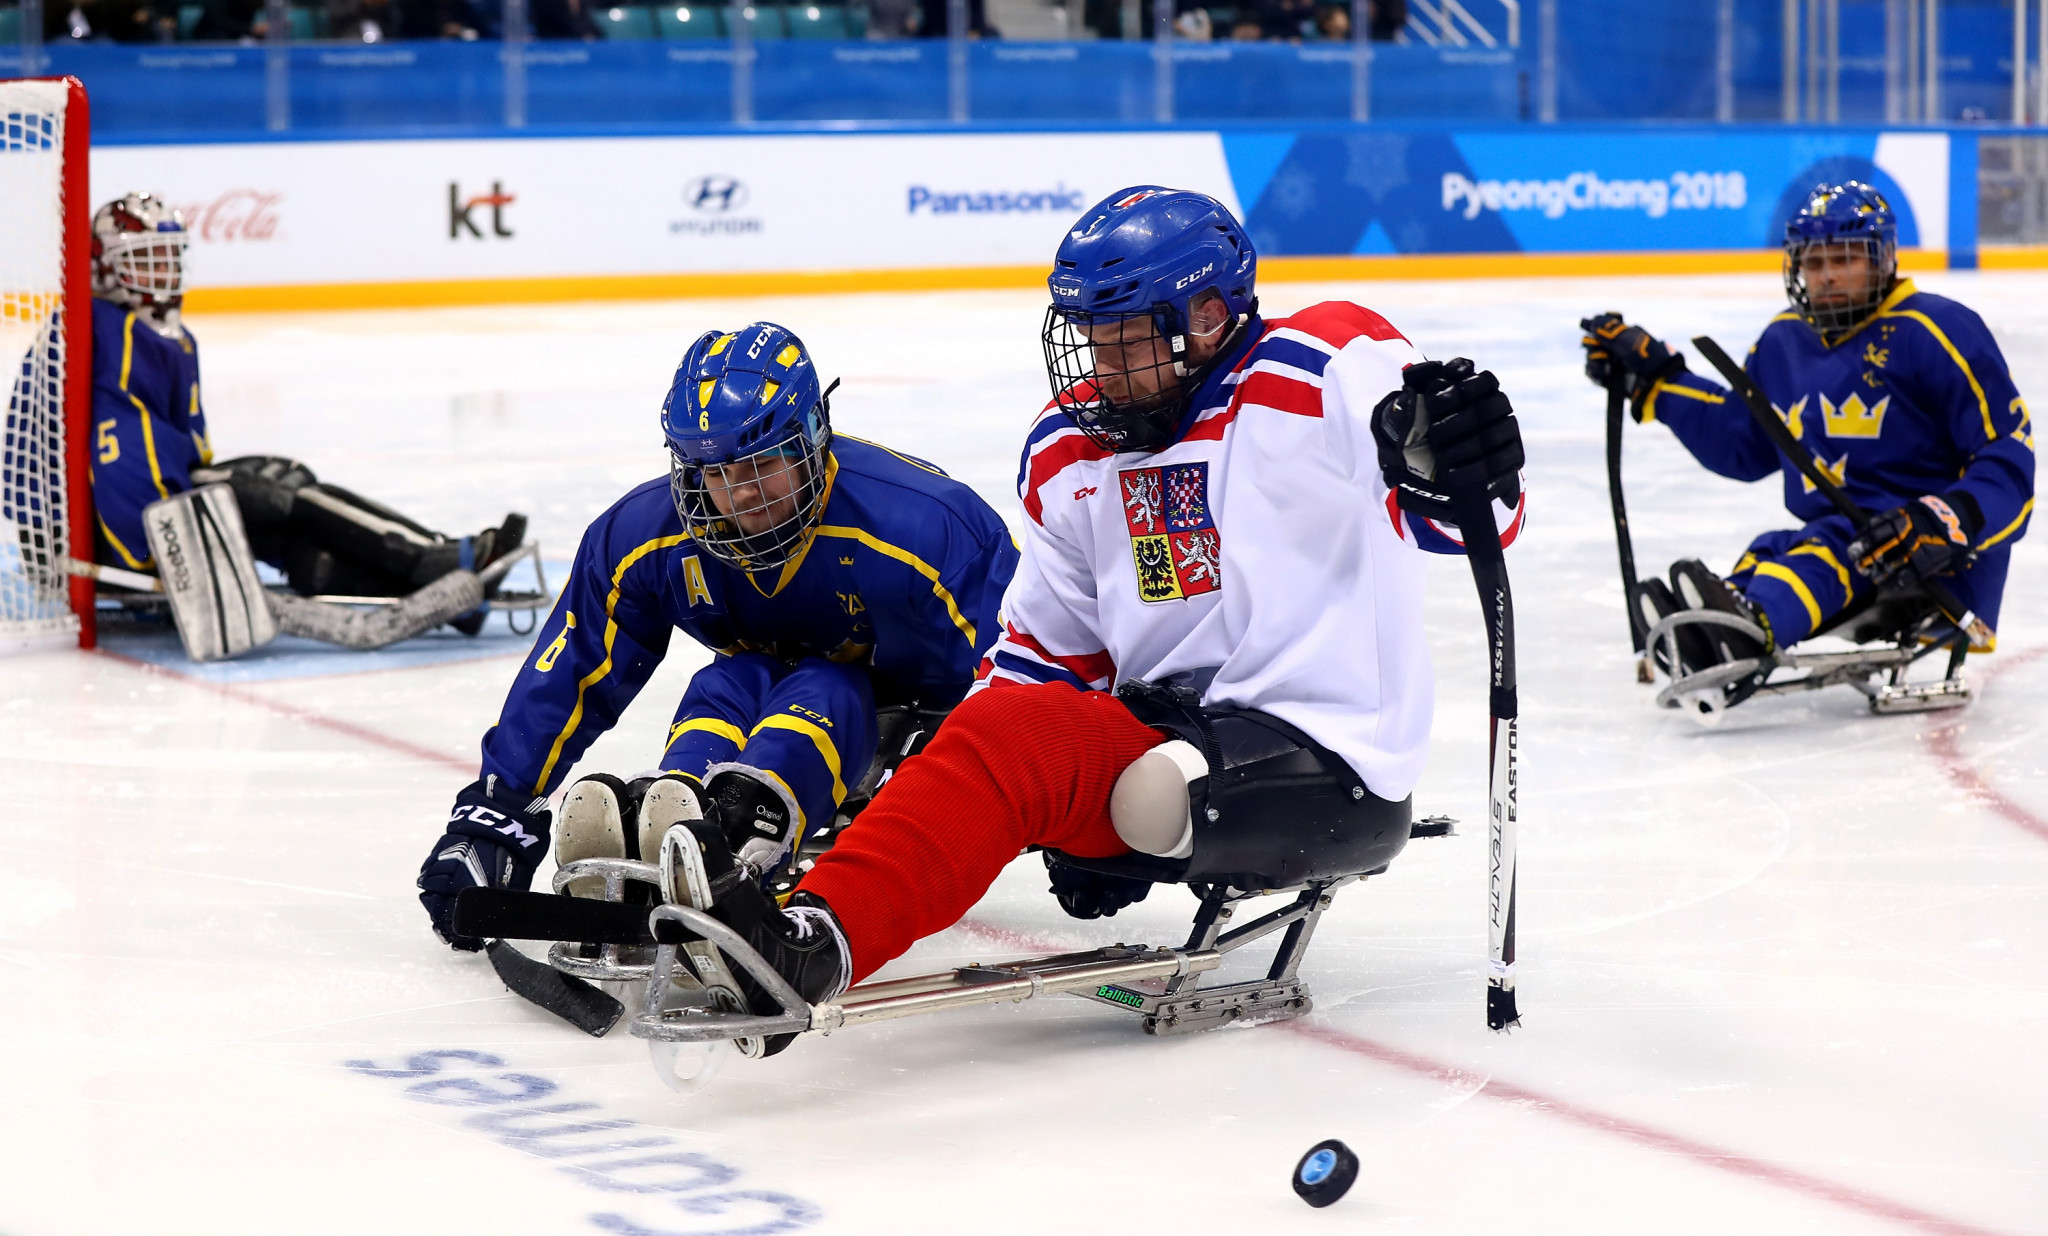 David Motycka of Czech Republic battles for the puck with Peter Nilsson of Sweden in a match at the Gangneung Hockey Centre ©Getty Images